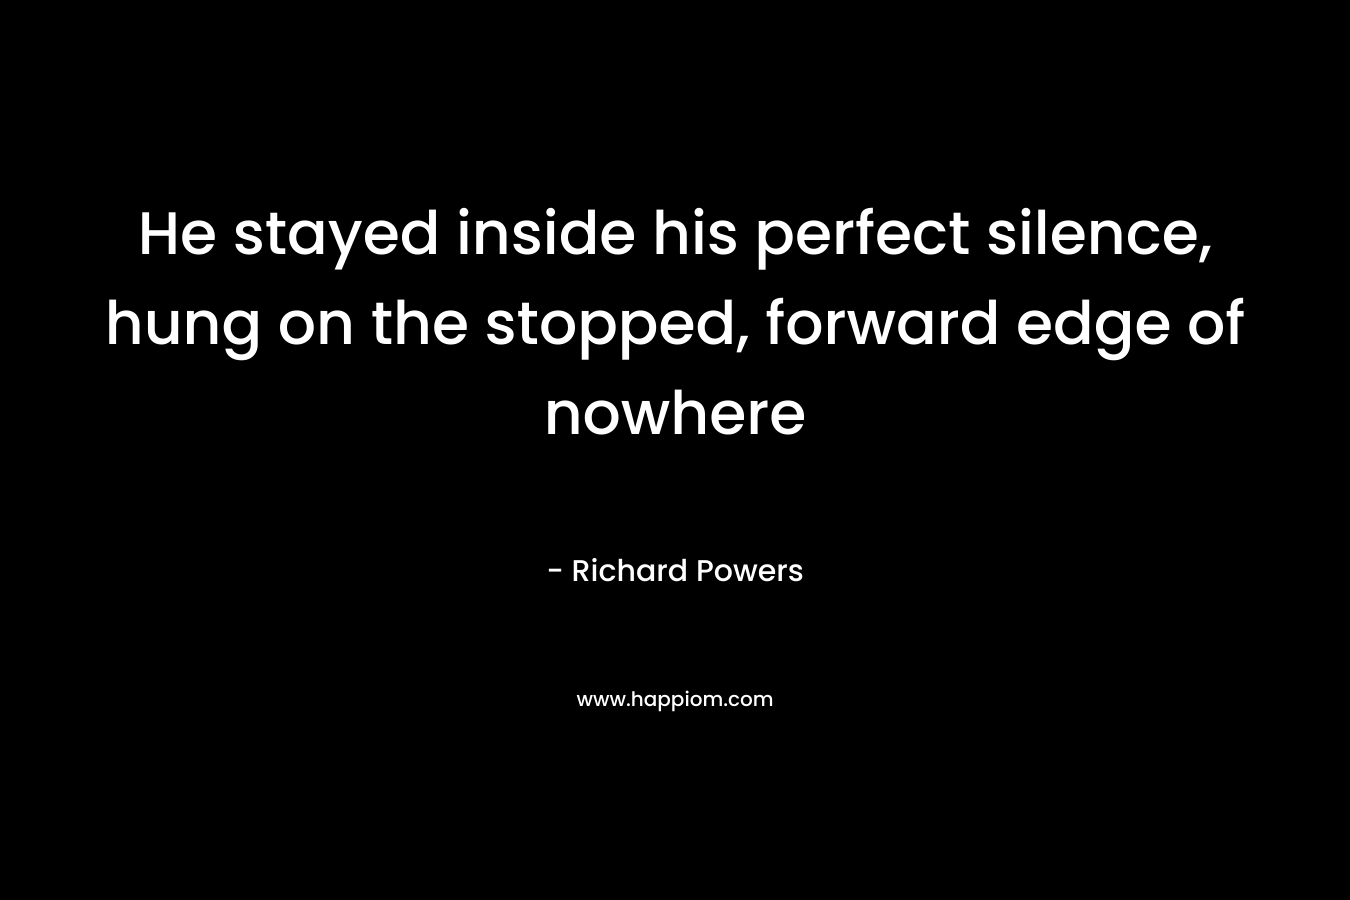 He stayed inside his perfect silence, hung on the stopped, forward edge of nowhere – Richard Powers